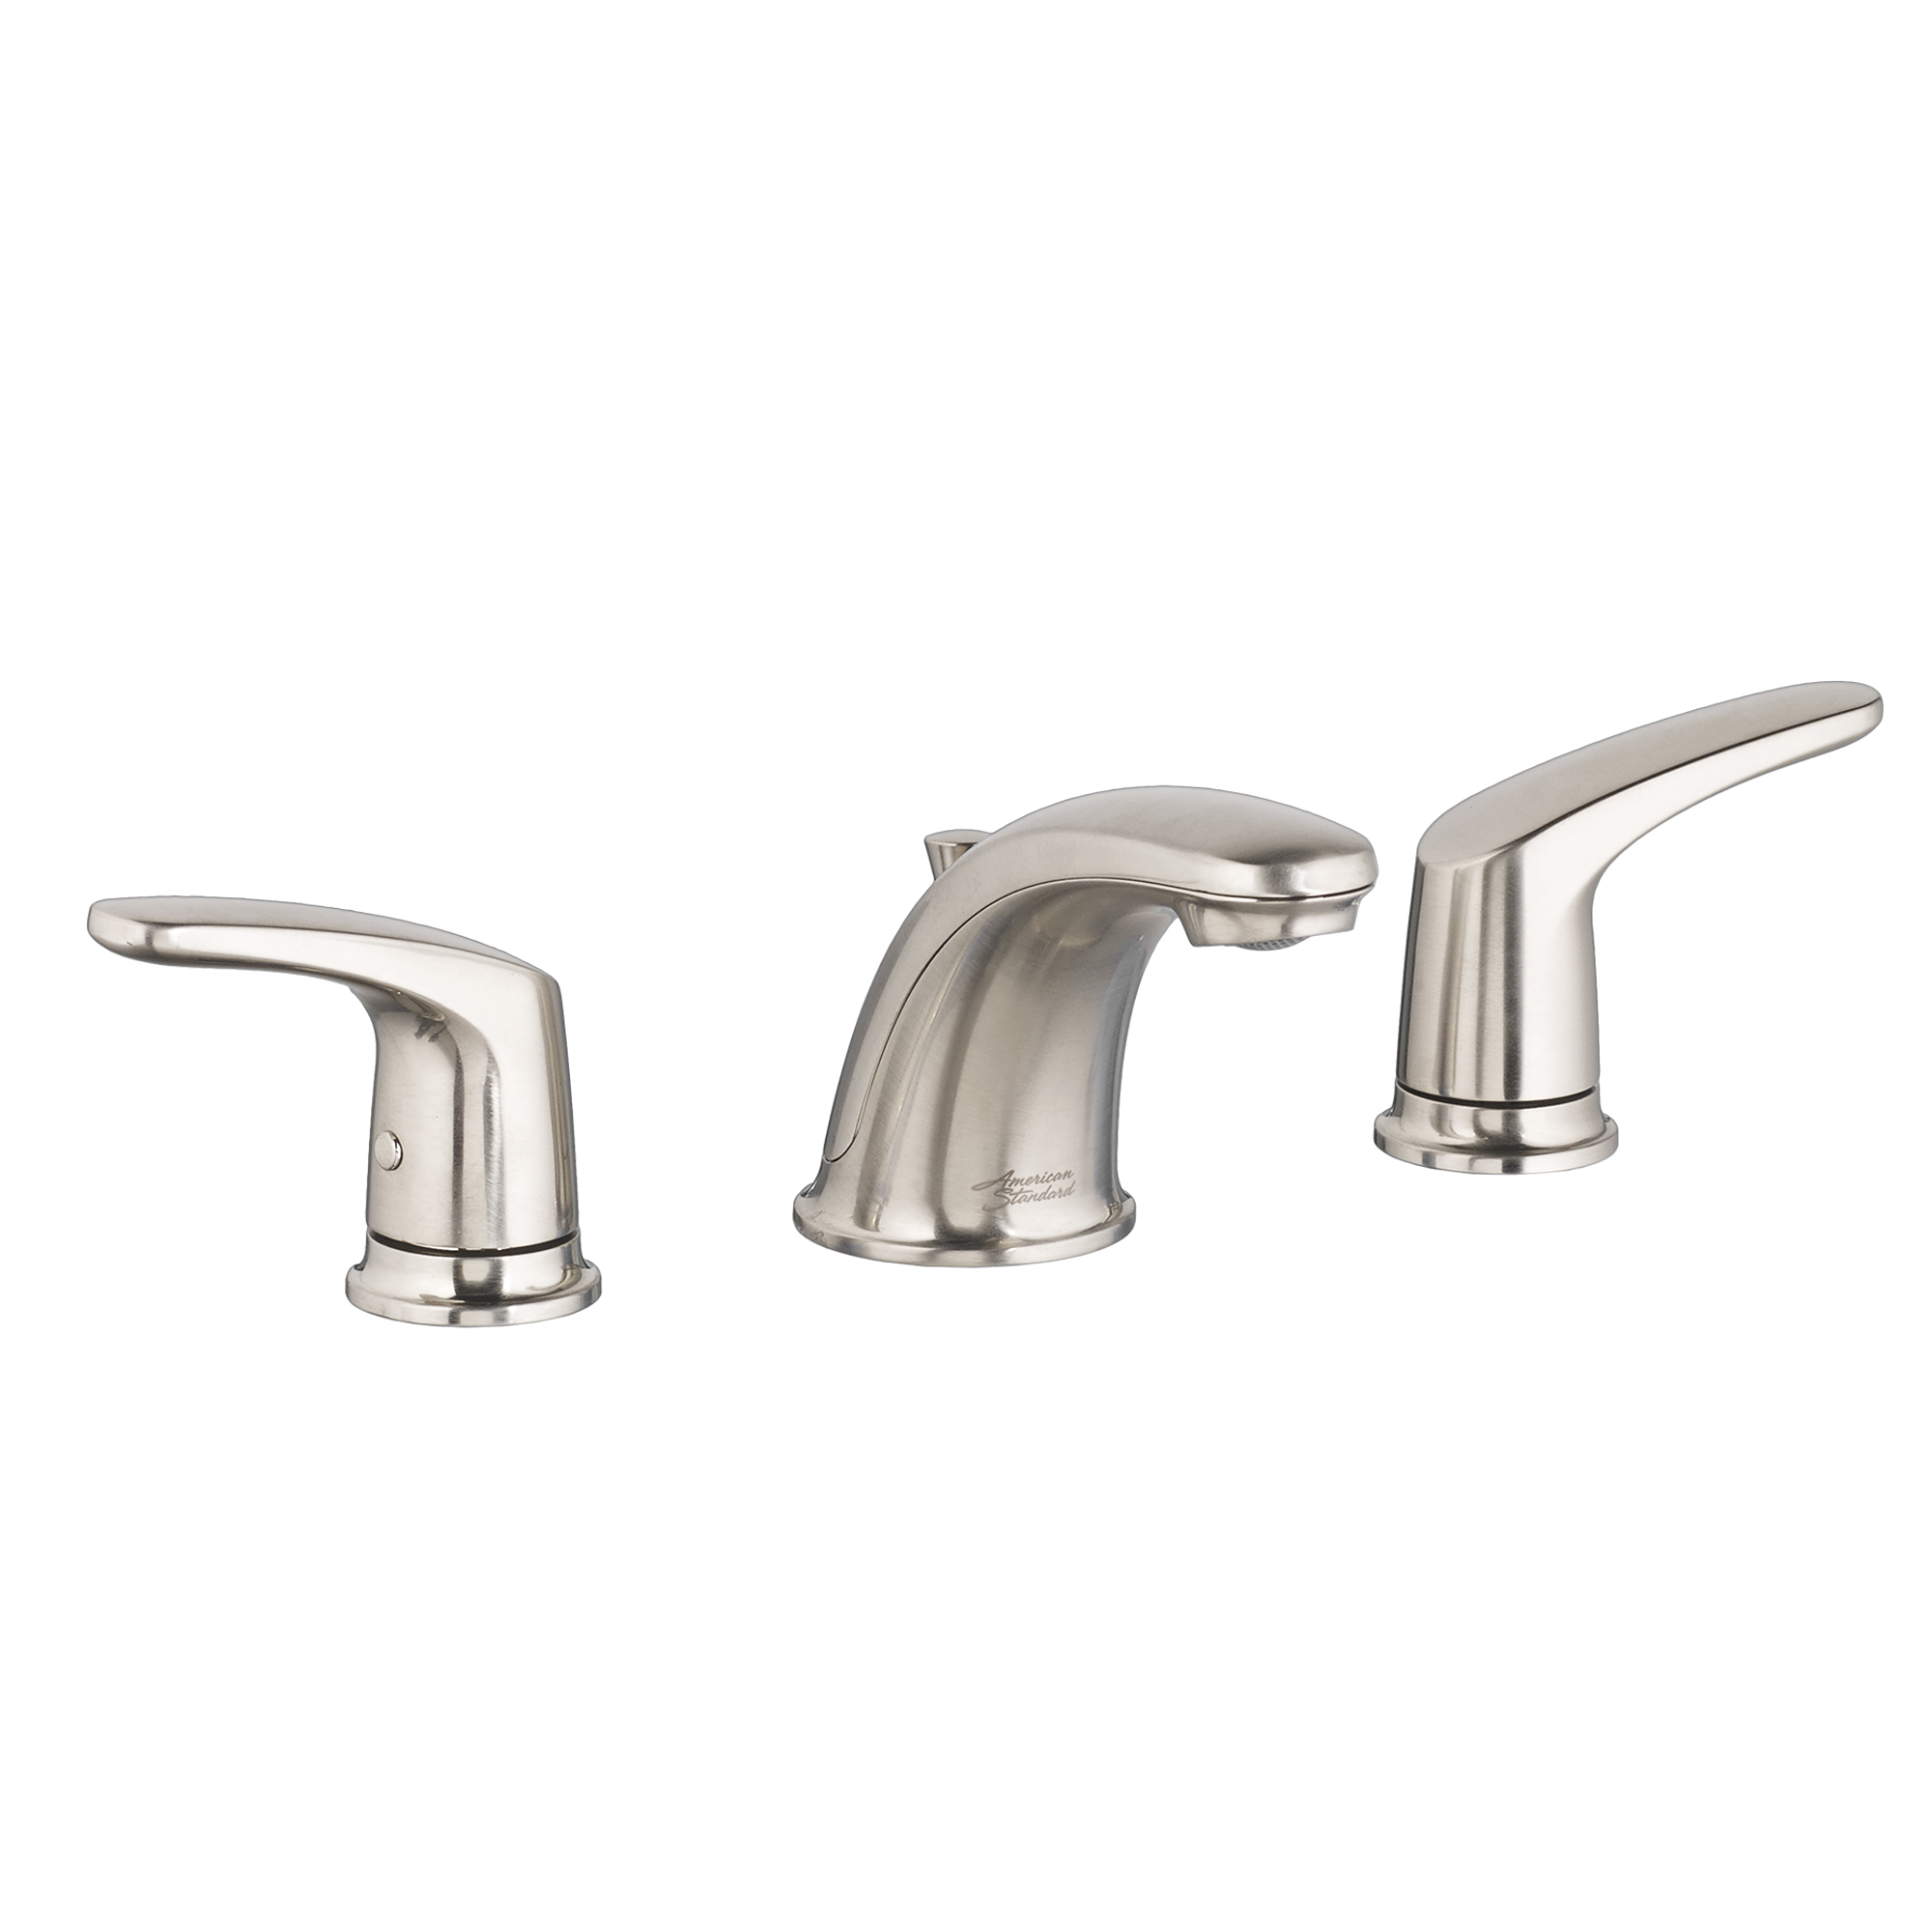 Colony® PRO 8-Inch Widespread 2-Handle Bathroom Faucet 1.2 gpm/4.5 L/min With Lever Handles